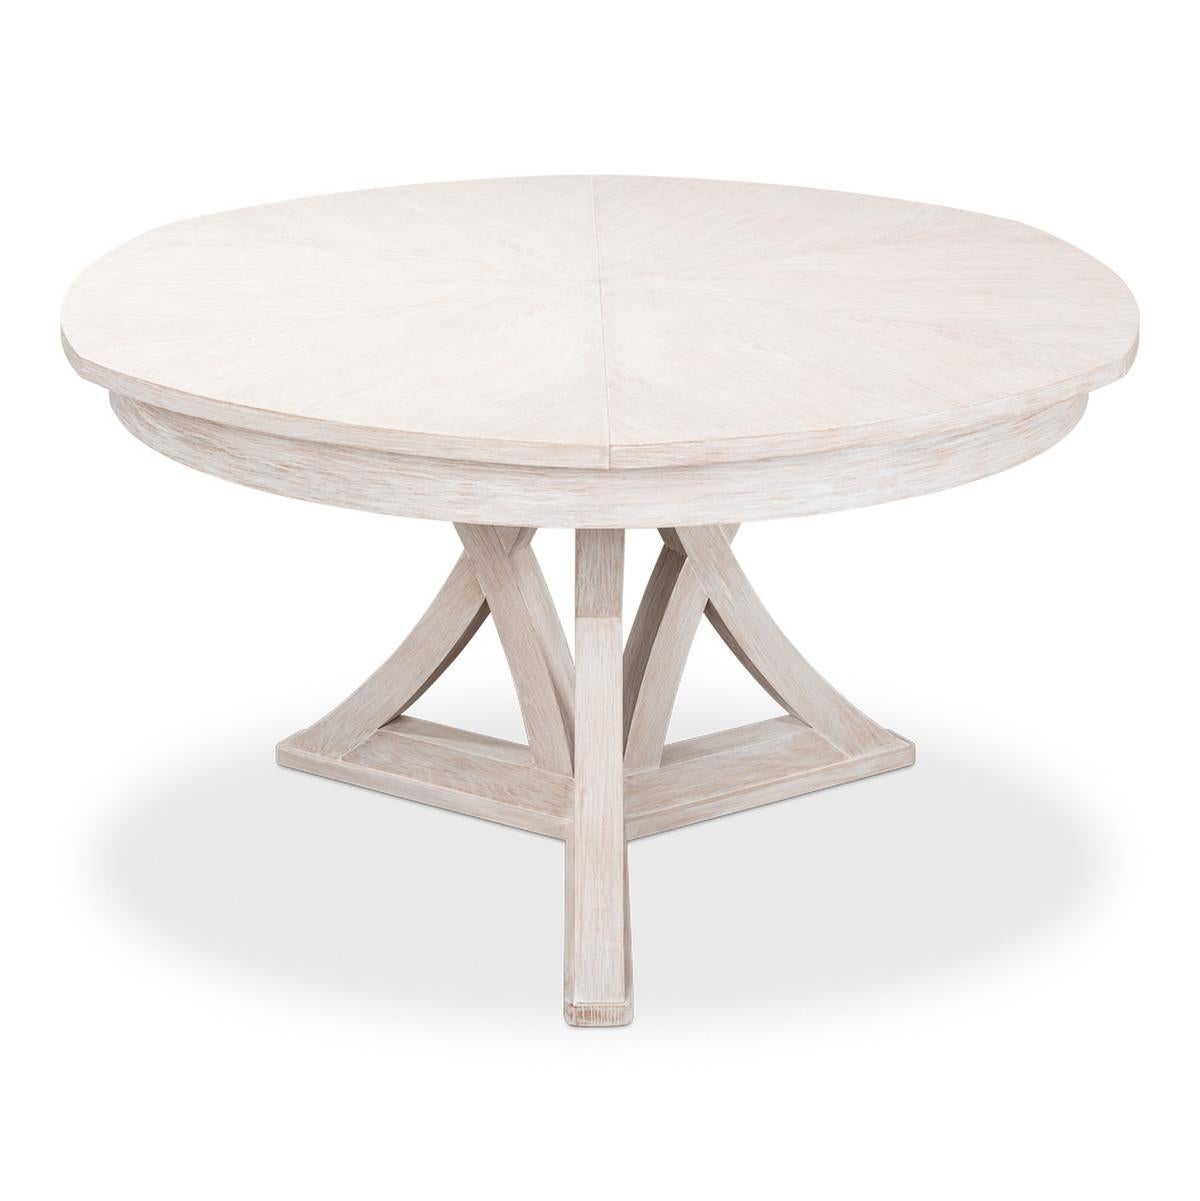 Wood Rustic Round Dining Table - Whitewash White For Sale